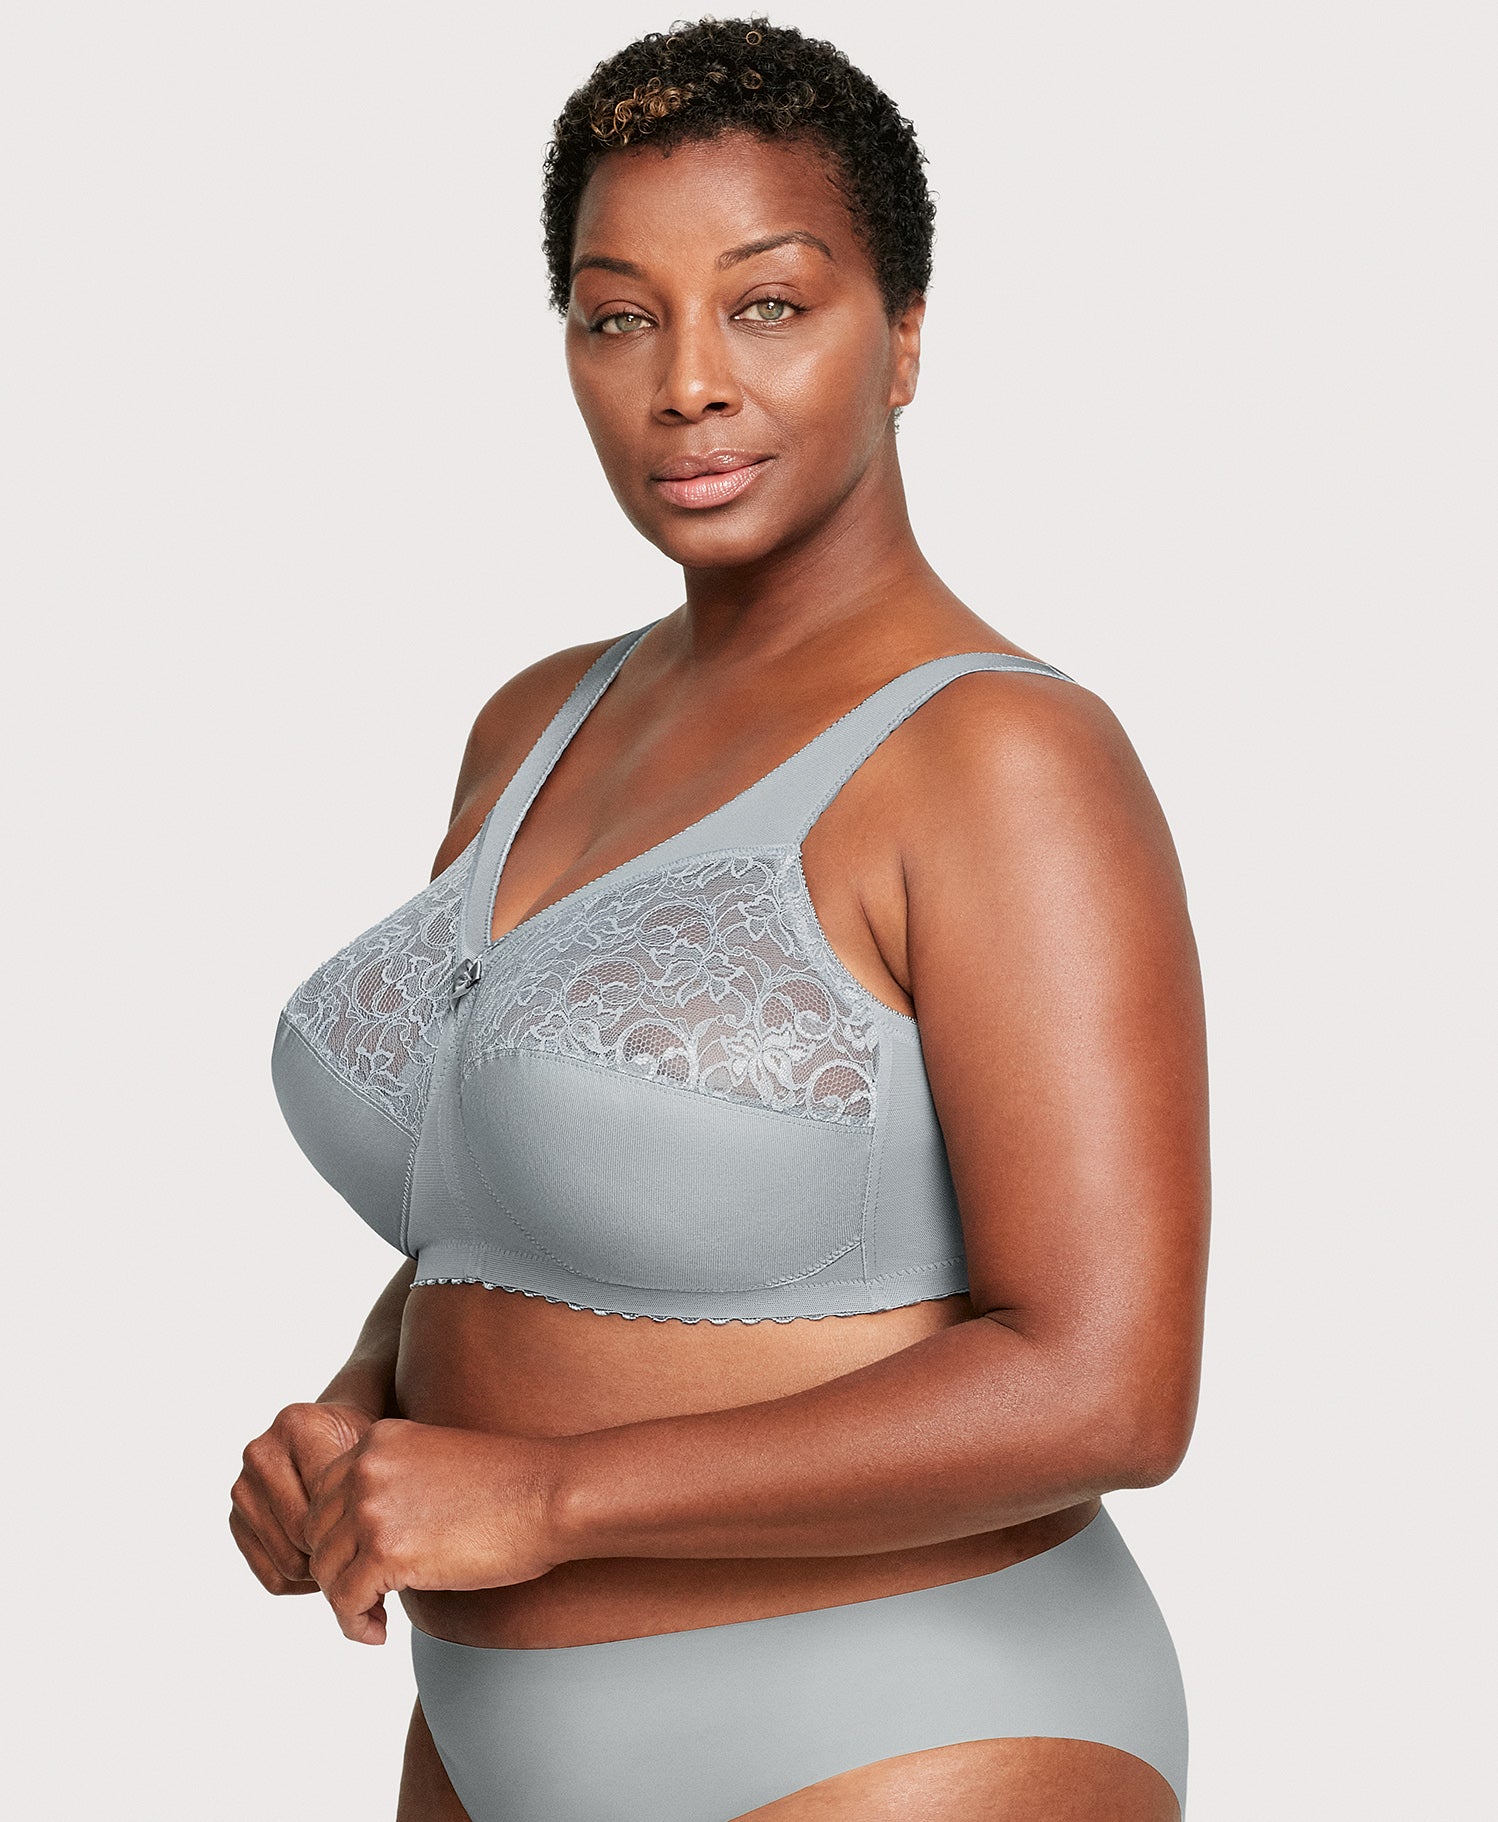 Greyghost 1Pc Women Lace Bralette Padded Wireless Bra Floral Lace Bra Front  Closure Back Smoothing Demi Bra Lace Bras Push up Thin Soft Bra Gray 6XL